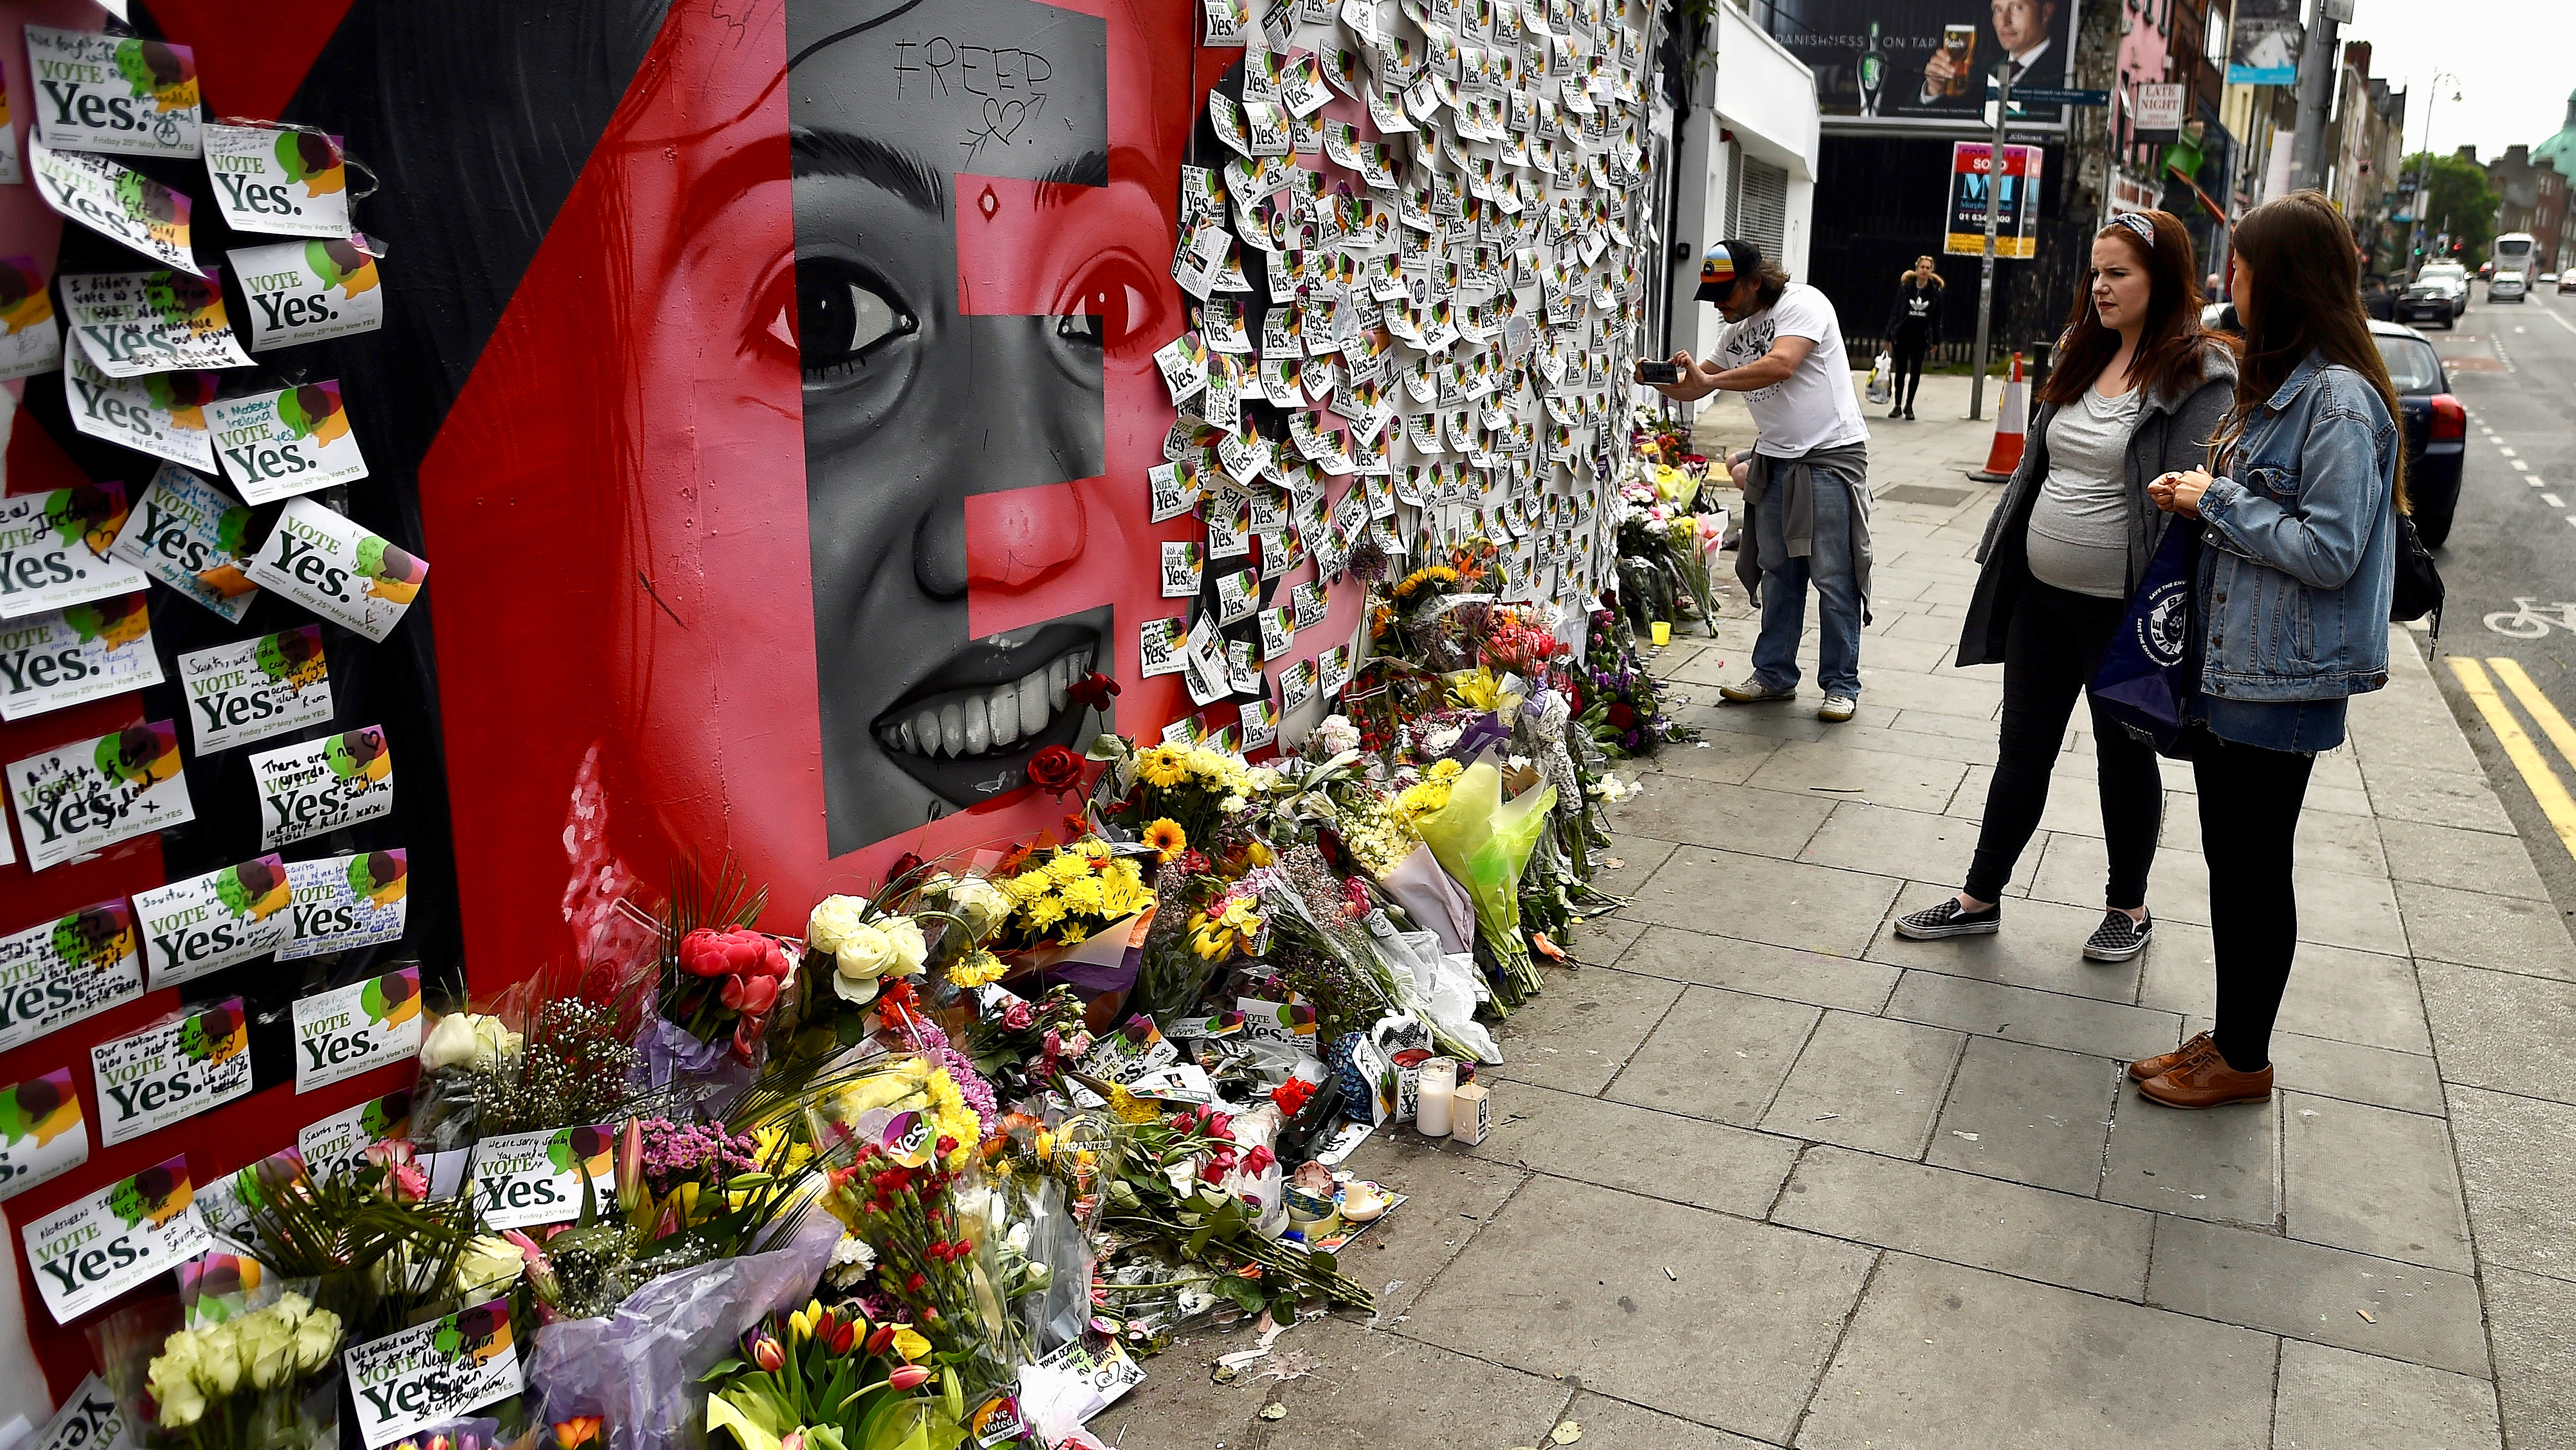 Messages are left at a memorial in Dublin to Savita Halappanava, who died from an infection after miscarrying her first child at an Irish hospital in 2012, one day after Irish voters took part in a national referendum to liberalize abortion laws on May 25